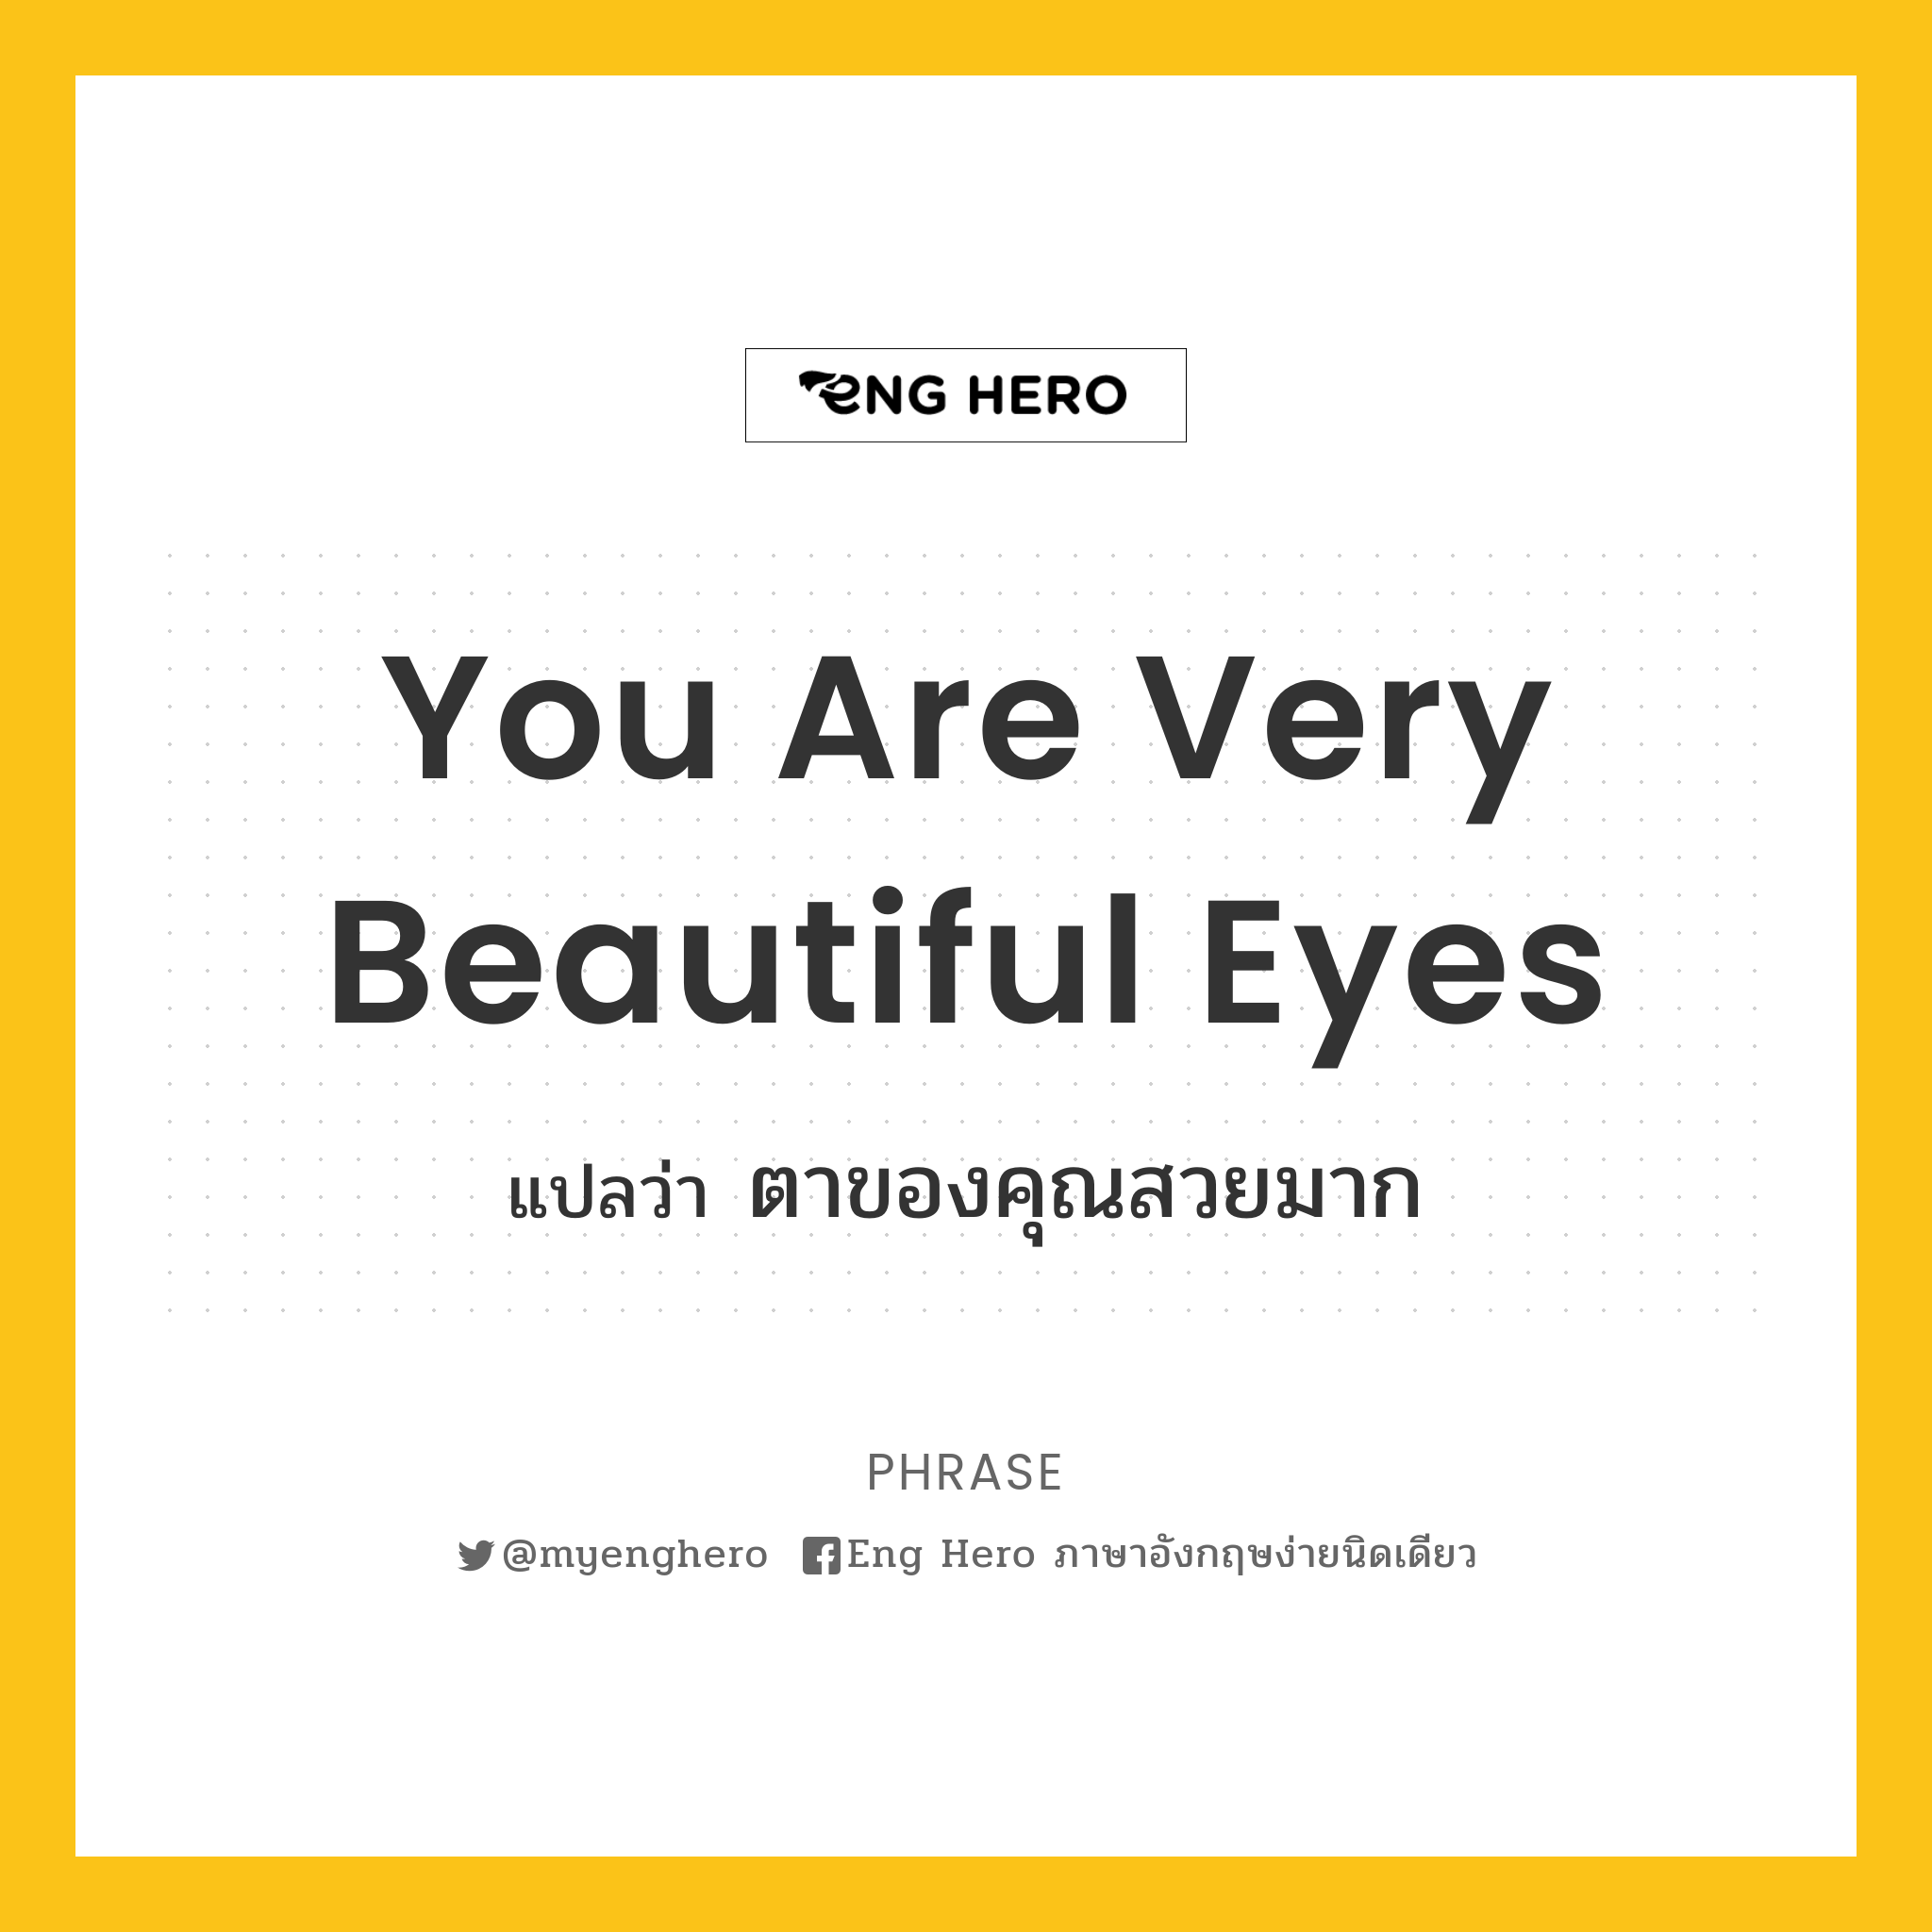 You are very beautiful eyes